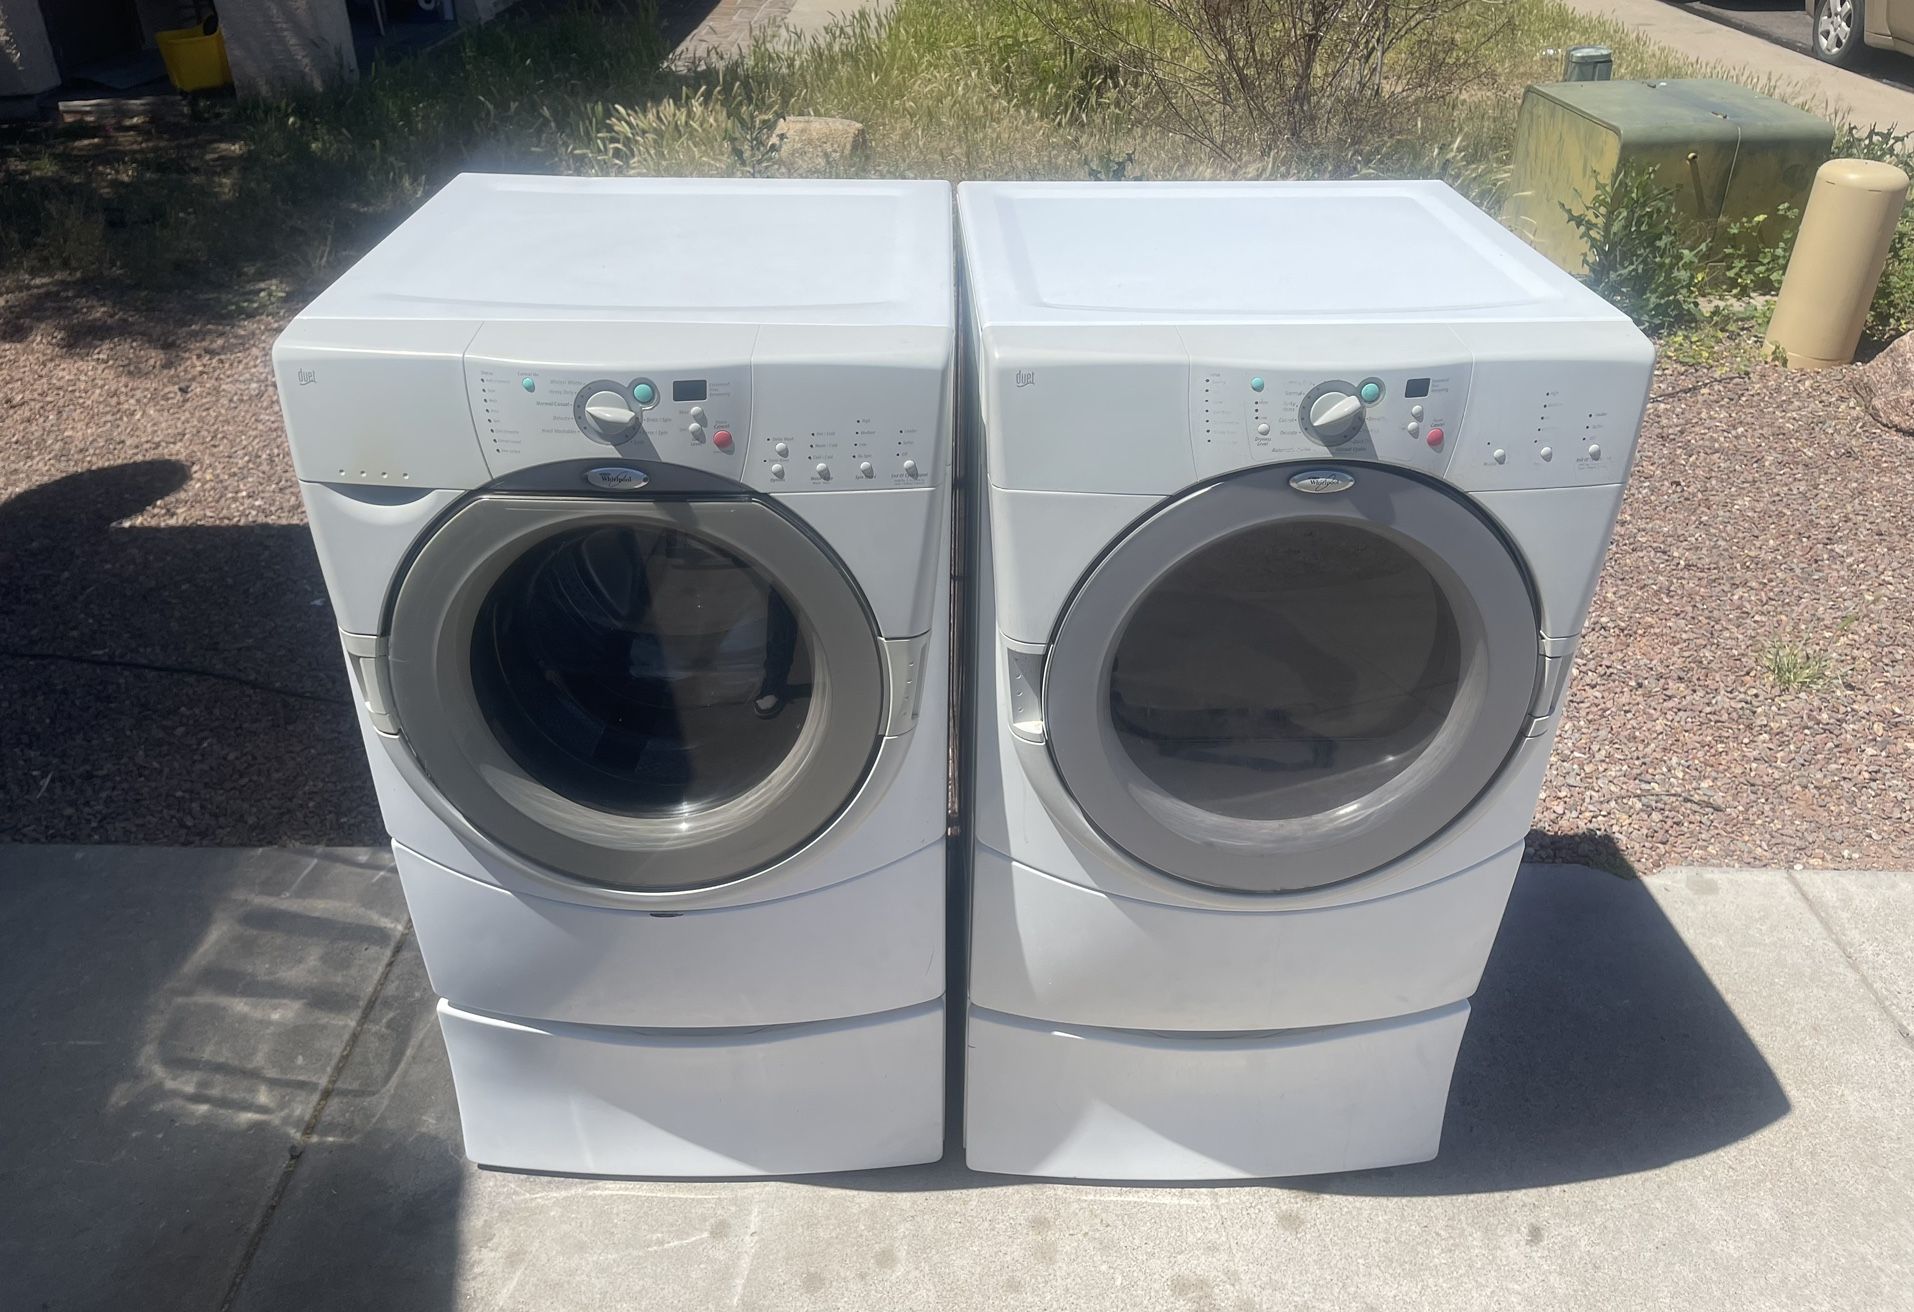 Washer Dryer Electric Front loaders 30 Day Warrant